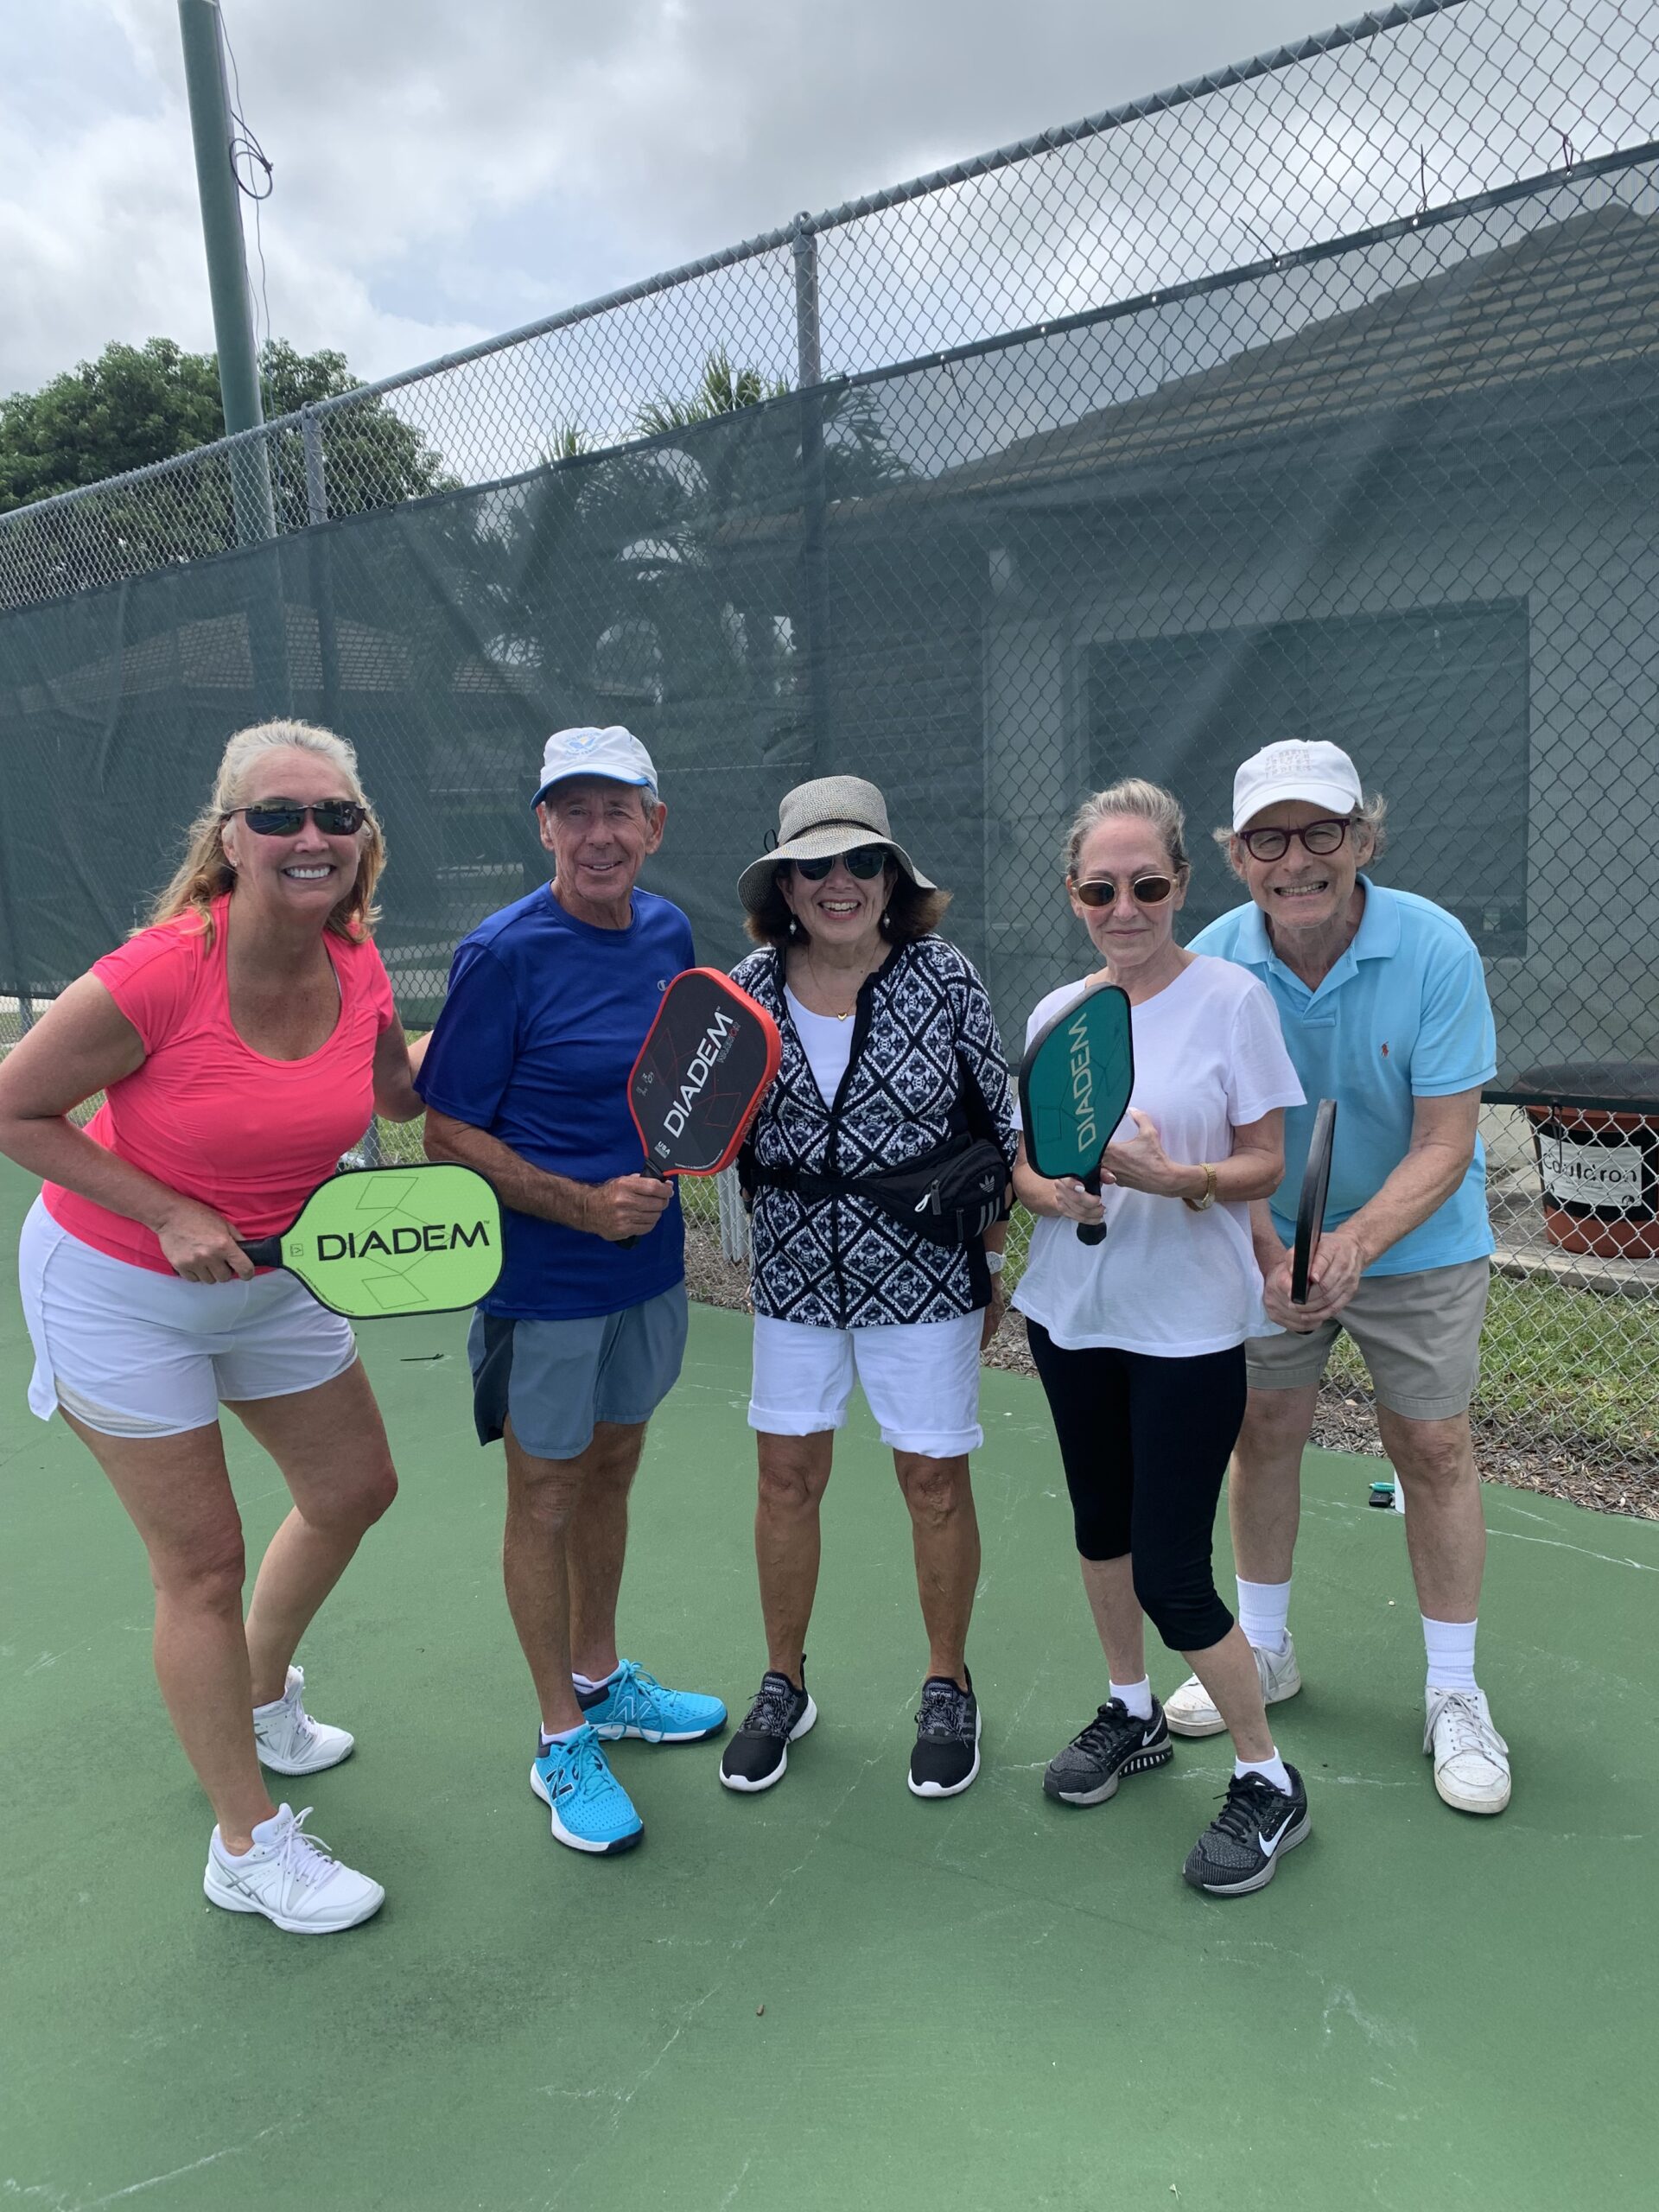 bob-with-ginny-larry-sally-and-dan-after-an-Intermediate-pickleball-clinic-in-lake-worth